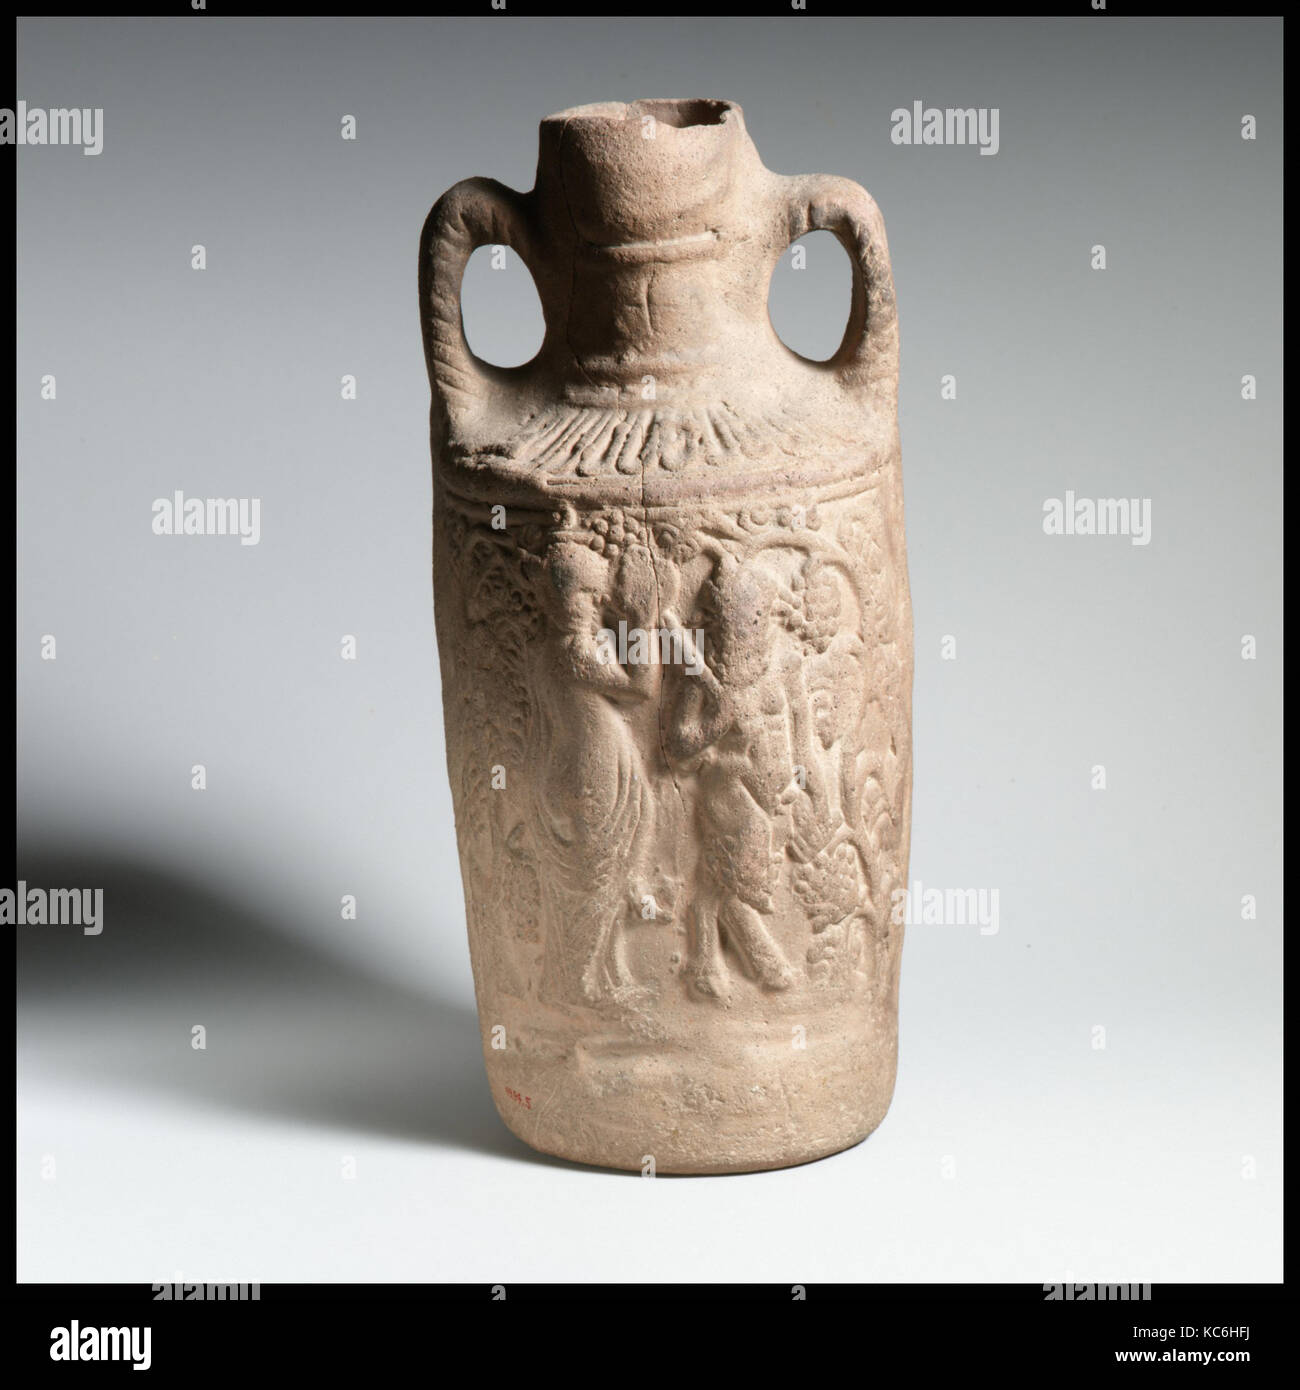 Terracotta amphora (jug), Mid-Imperial, 2nd–3rd century A.D., Roman, Terracotta; Cnidian relief ware, H. 10 3/8 in. (26.4 cm Stock Photo